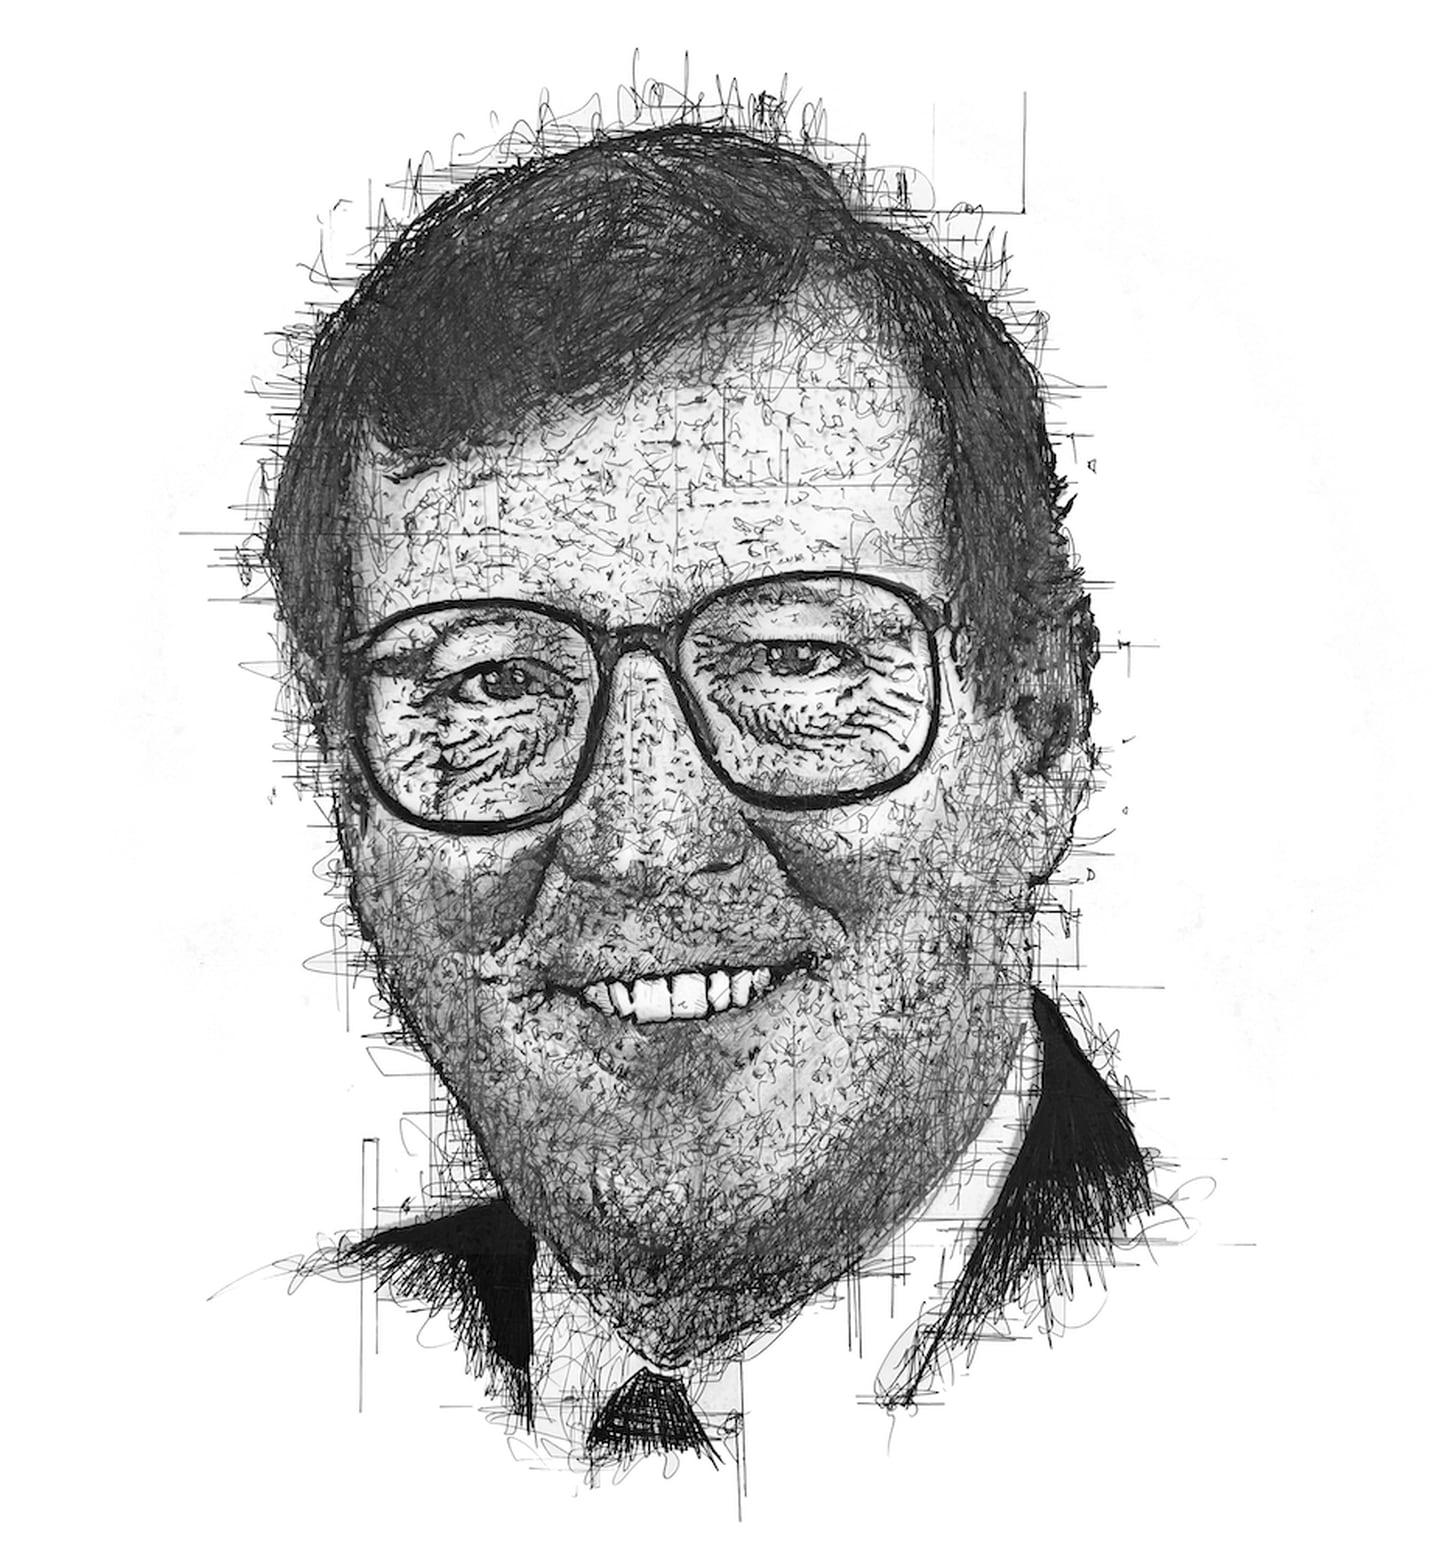 Portrait of the late UUP leader David Trimble by artist Shane Gillen, hand-drawn as part of his series commemorating the signatories of the Good Friday Agreement, 25 years on.